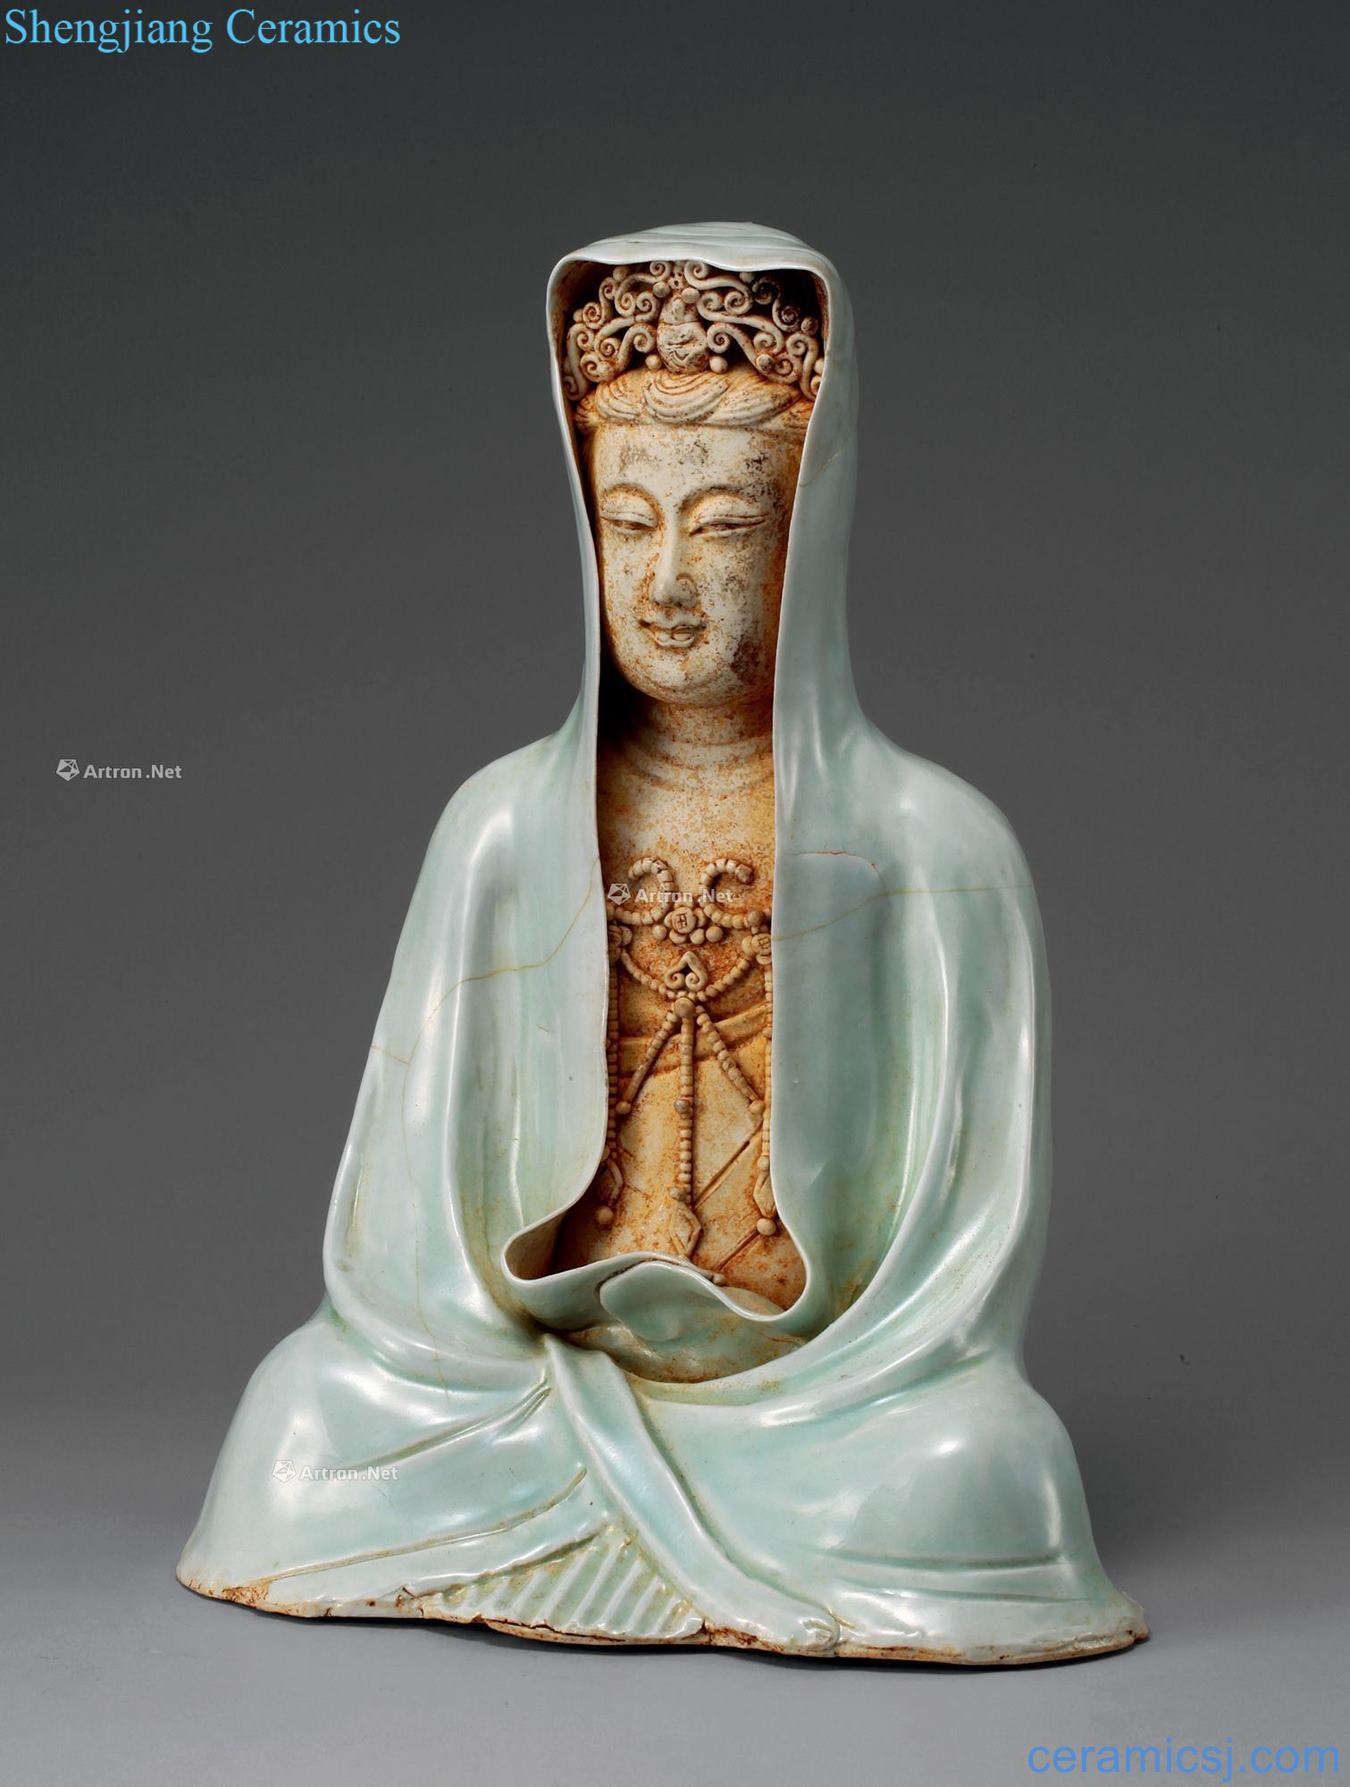 The southern song dynasty green craft goddess of mercy